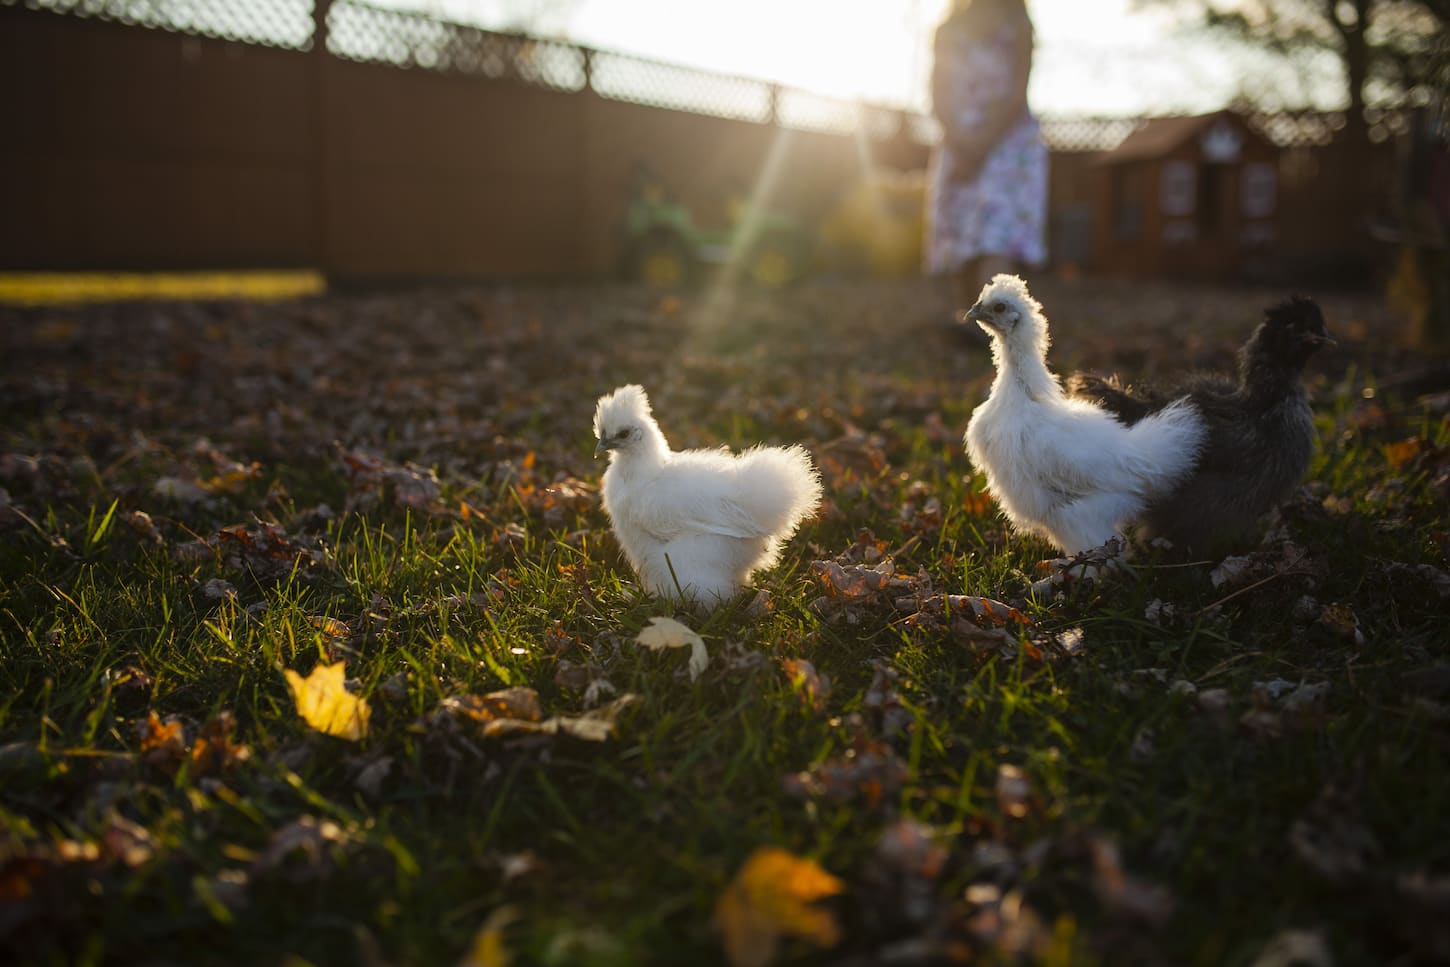 An image of baby chickens in farm during sunset.